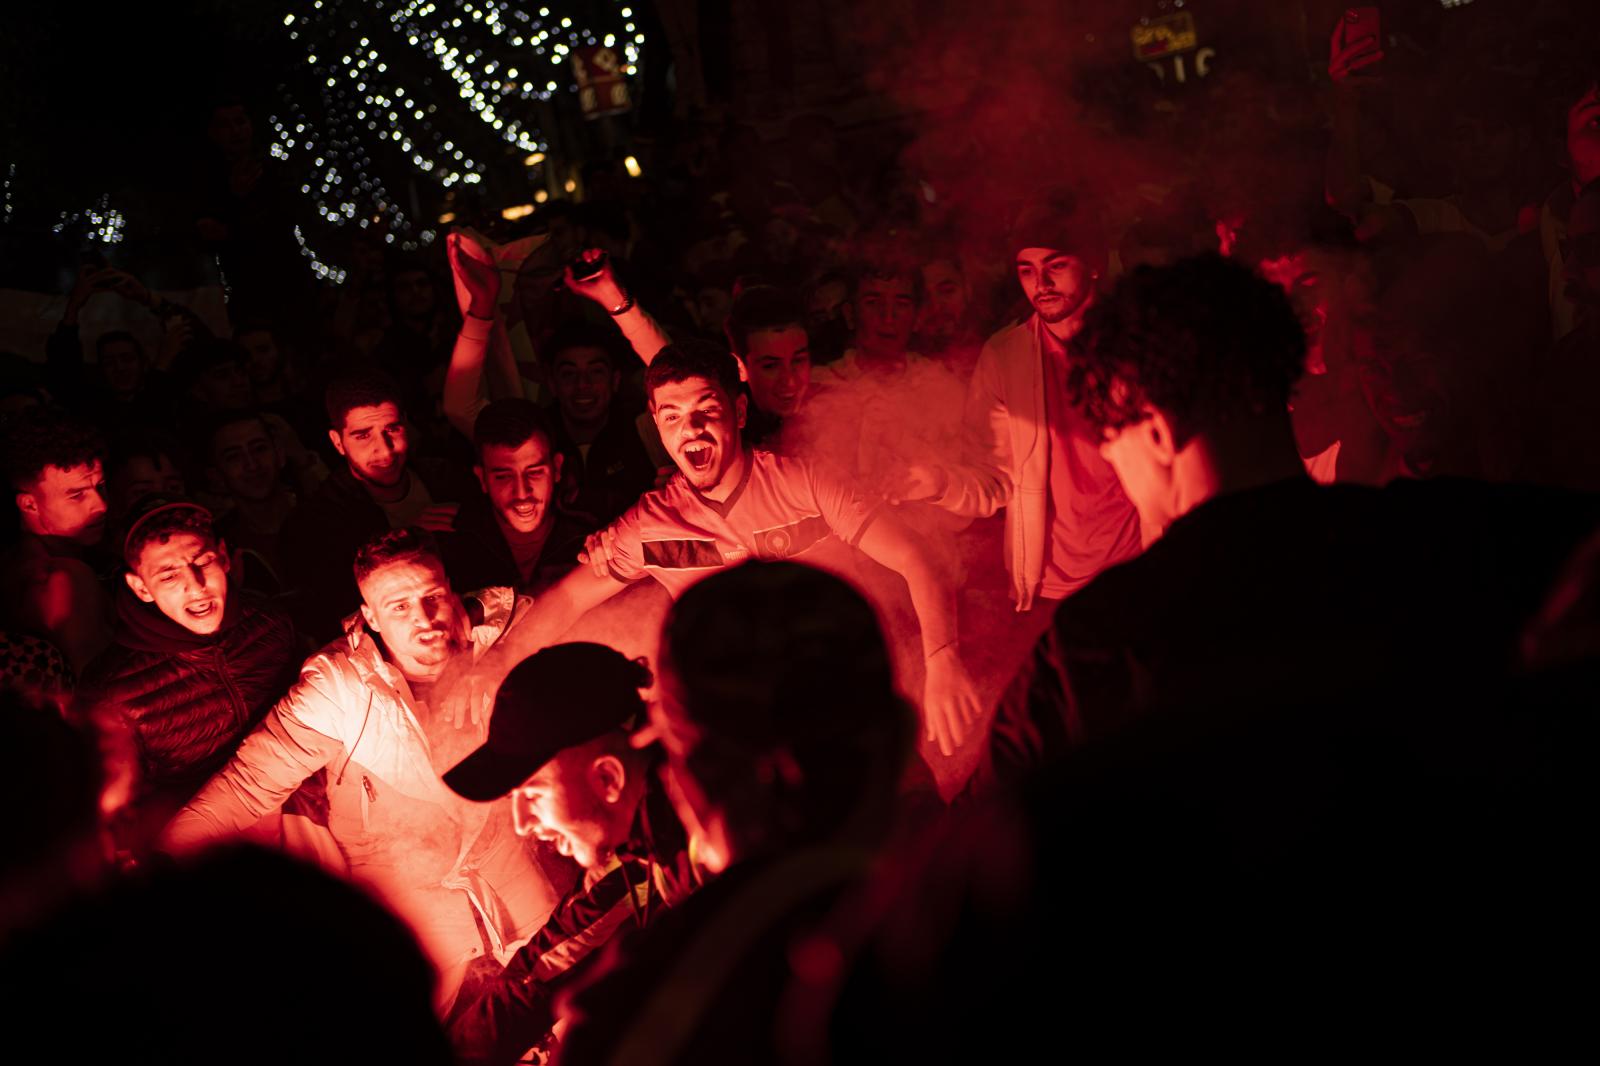 Image from Daily News - The Moroccan euphoria carried on to the streets of...